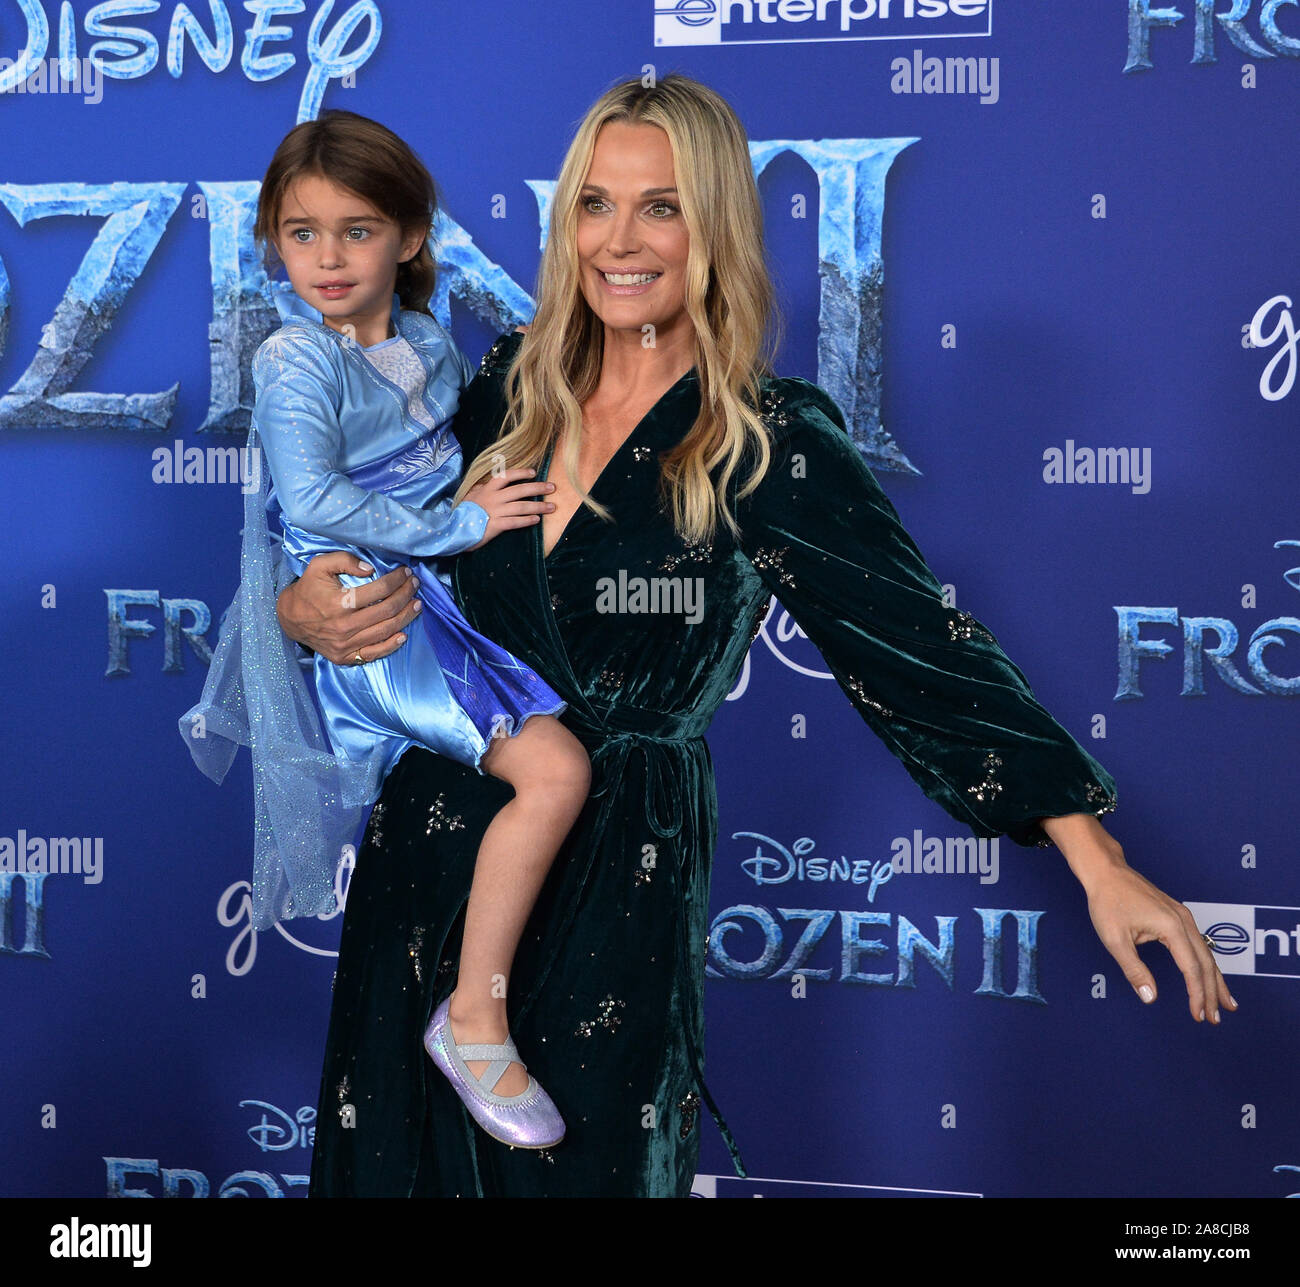 Los Angeles, United States. 07th Nov, 2019. Molly Sims attends the premiere of the animated musical comedy 'Frozen II' premiere at the Dolby Theatre in the Hollywood section of Los Angeles on Thursday, November 7, 2019. Storyline: Anna, Elsa, Kristoff, Olaf and Sven leave Arendelle to travel to an ancient, autumn-bound forest of an enchanted land. They set out to find the origin of Elsa's powers in order to save their kingdom. Photo by Jim Ruymen/UPI Credit: UPI/Alamy Live News Stock Photo